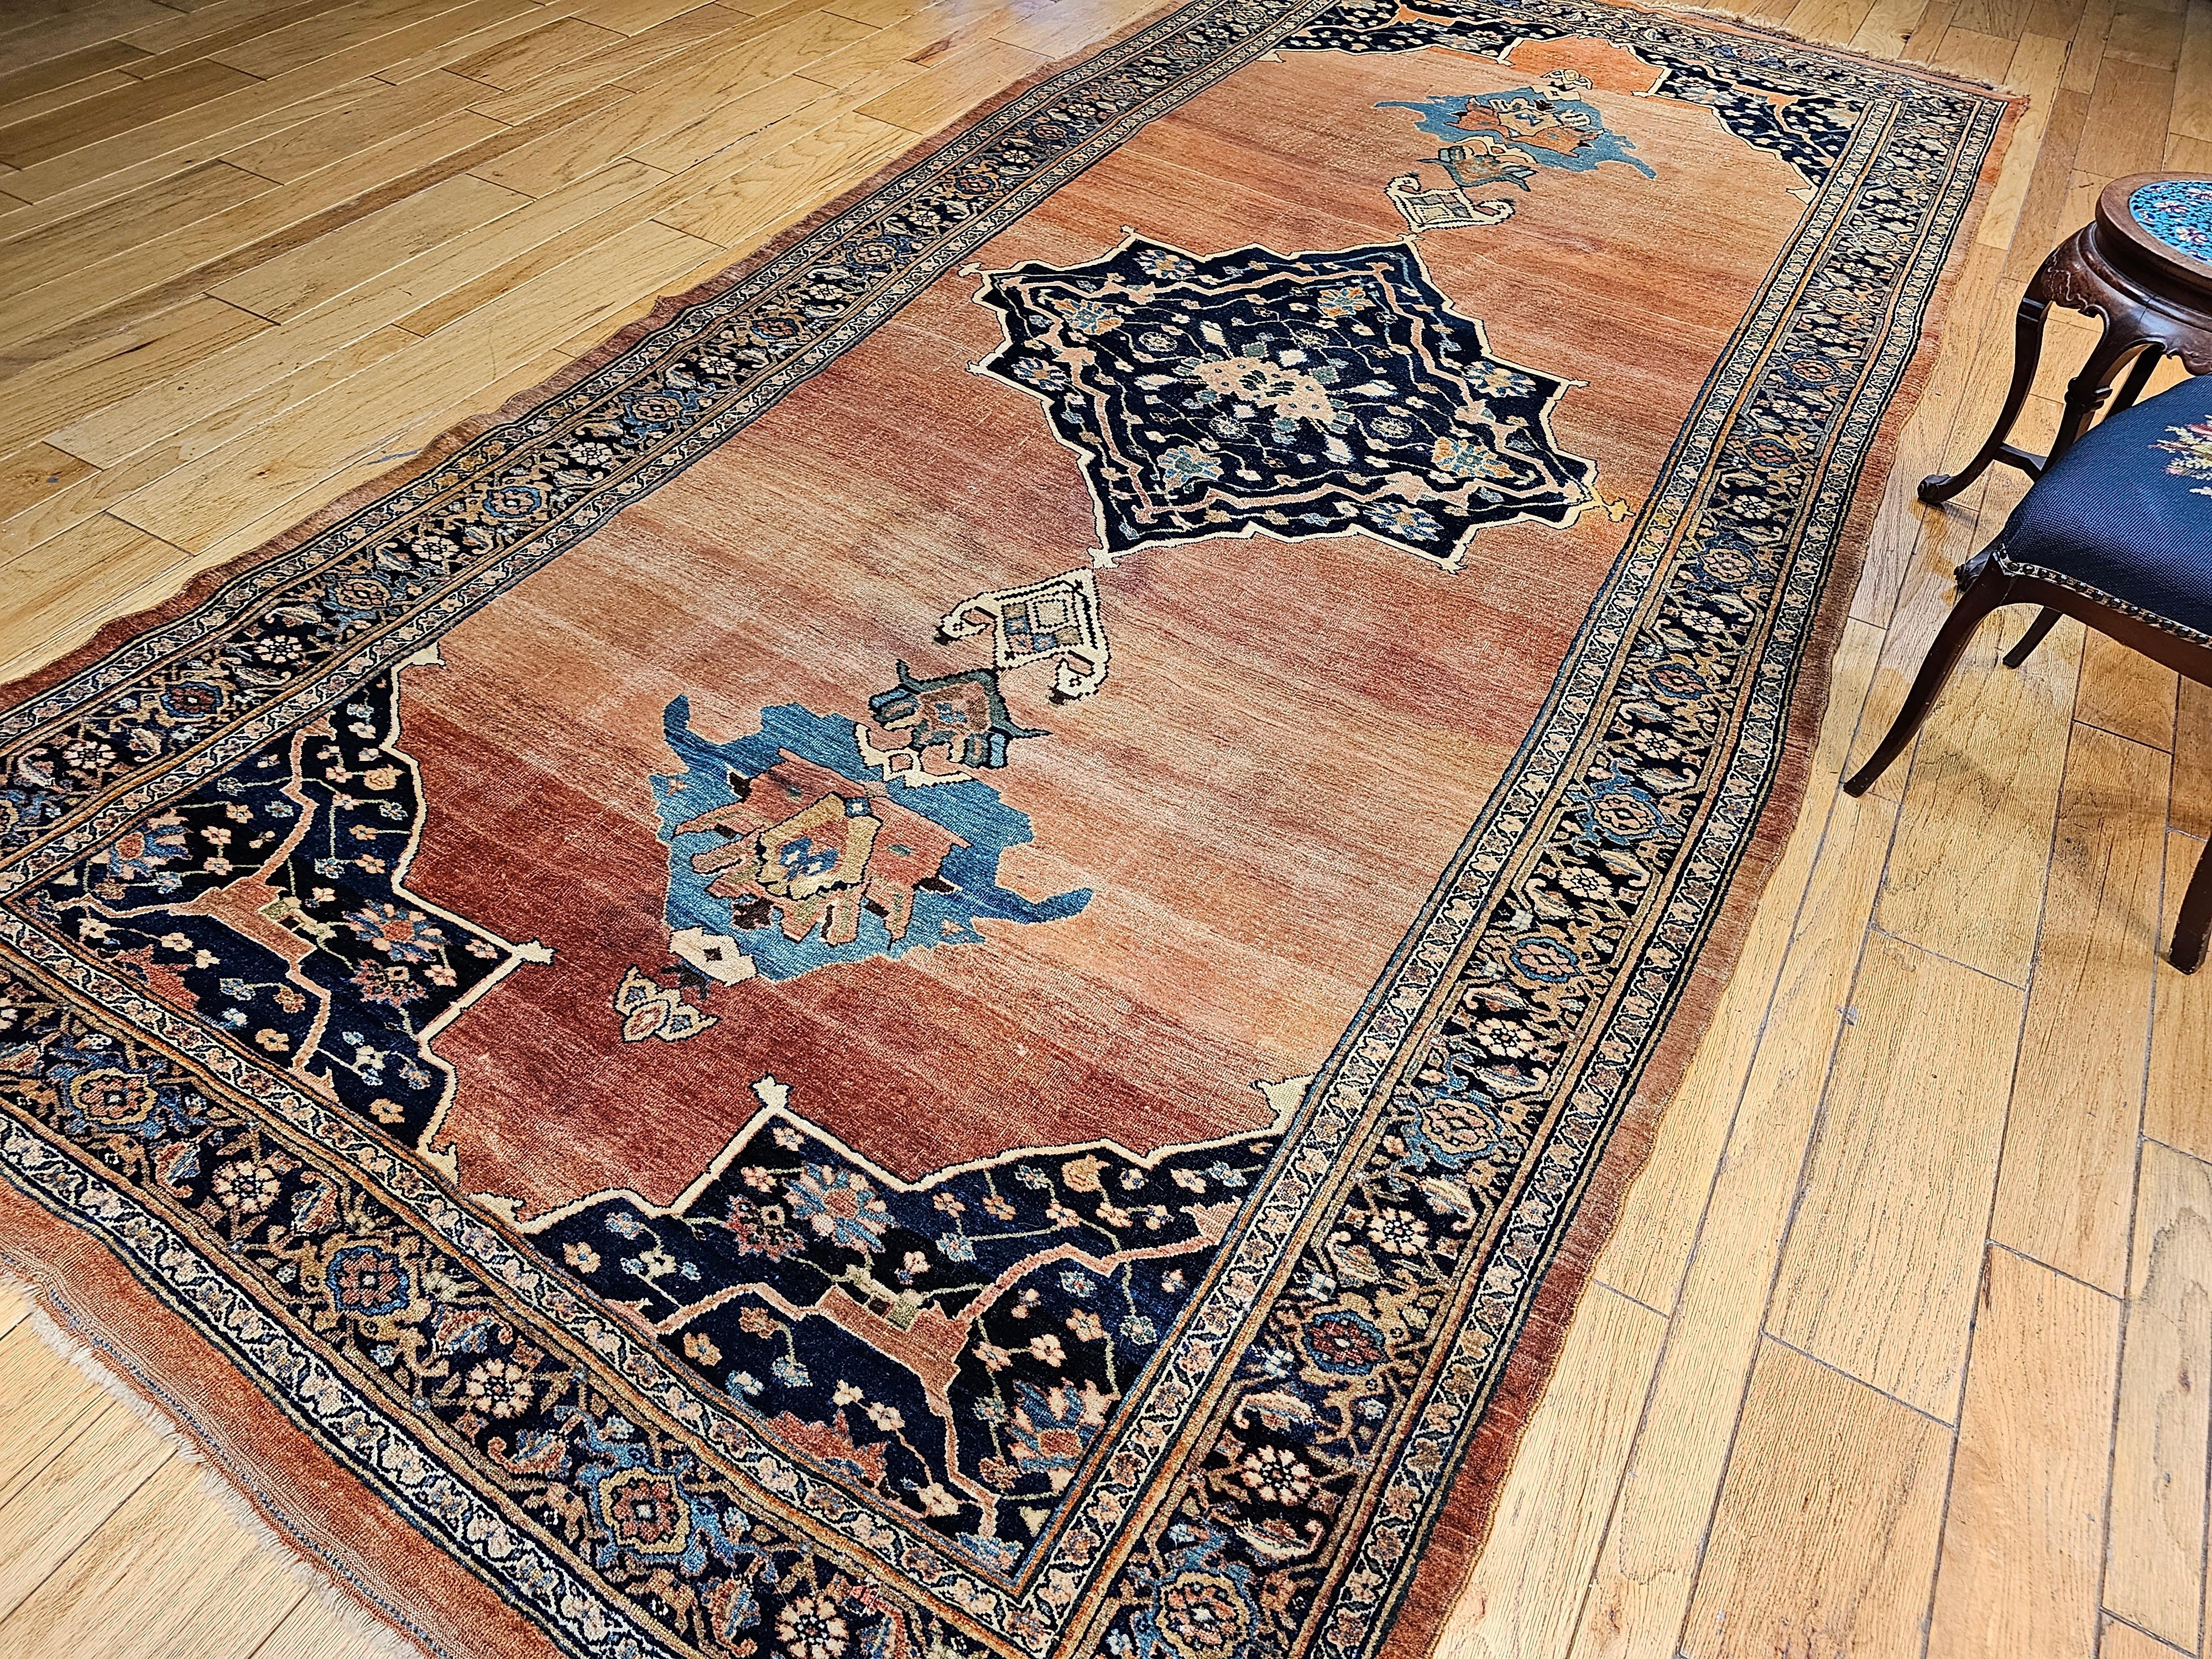 19th Century Persian Bidjar Gallery Rug in Brick-Red, Navy, Turquoise, Yellow For Sale 5